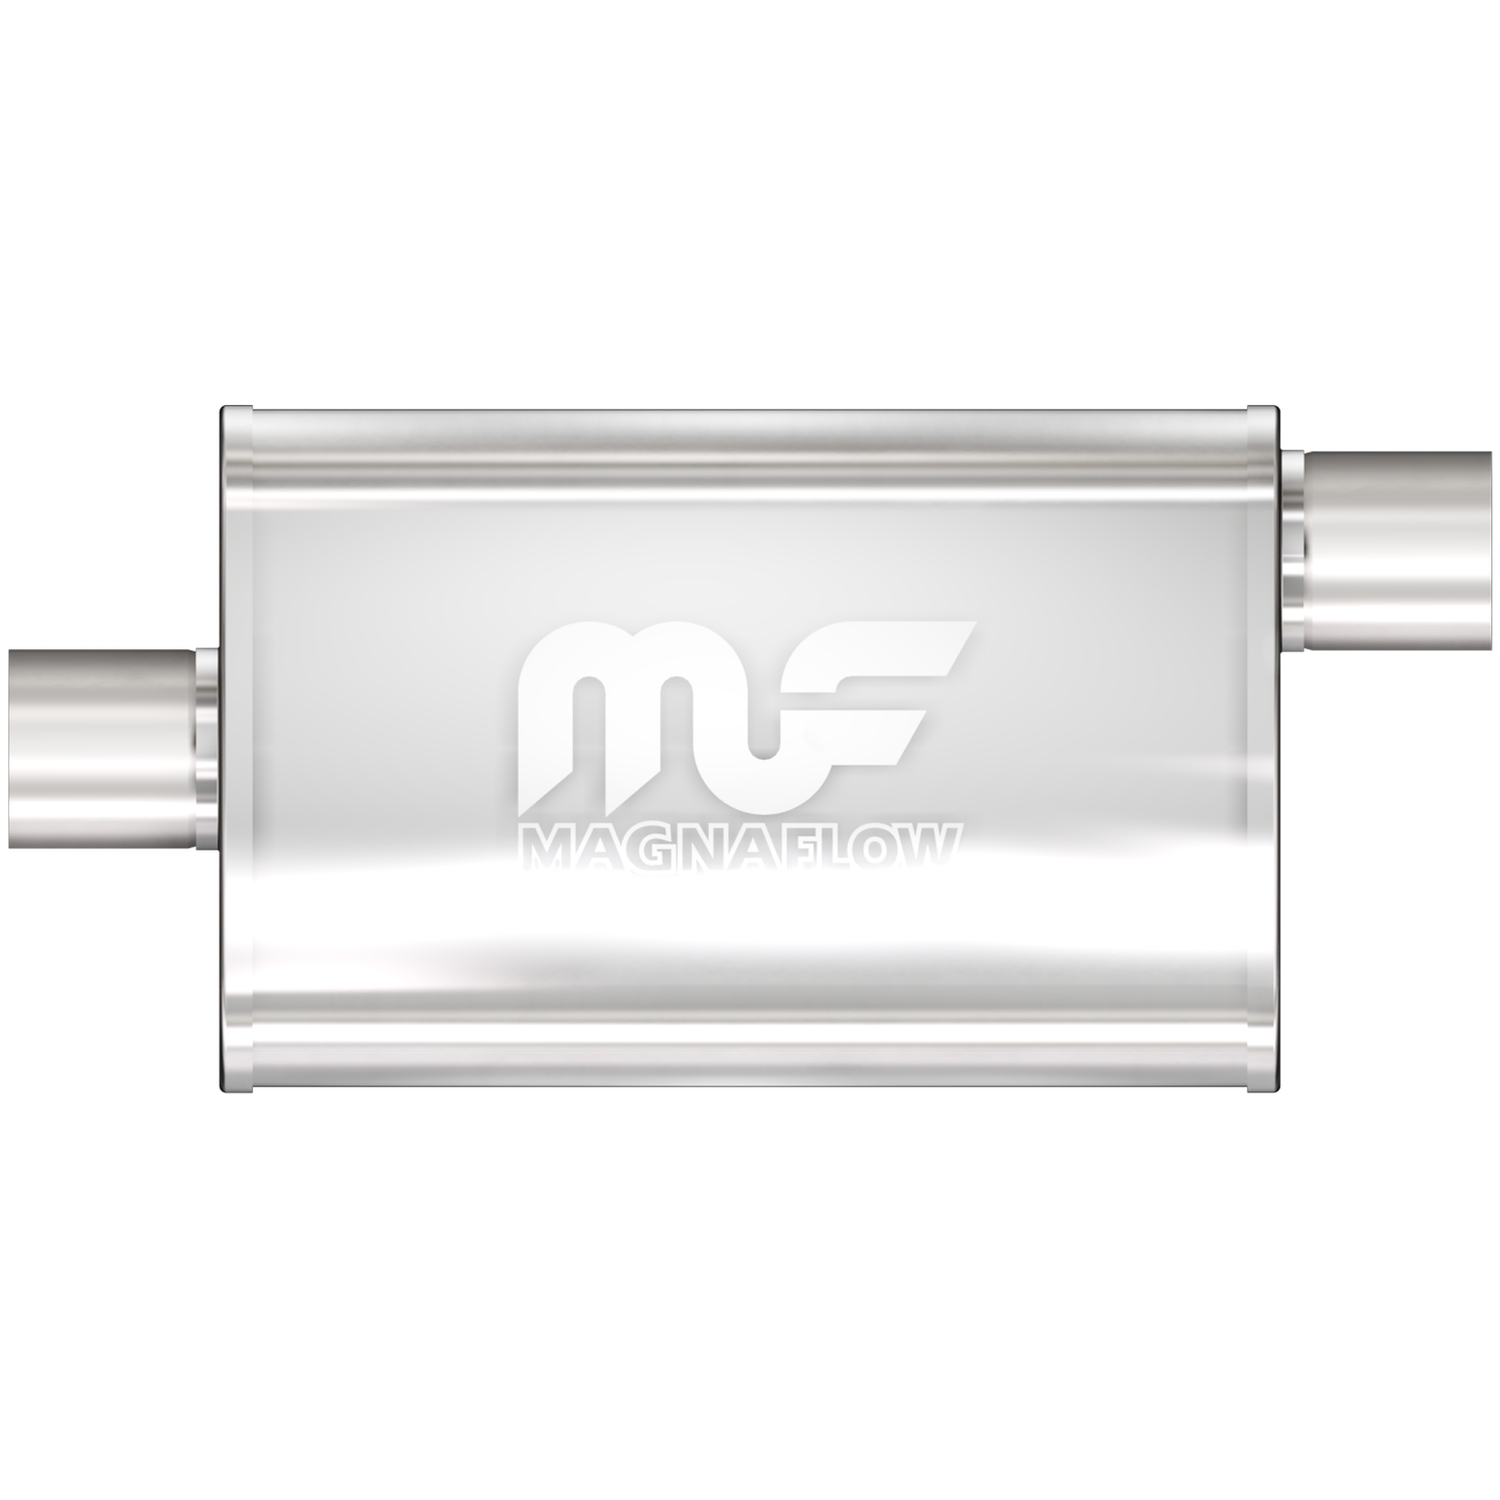 3.5" x 7" Oval Muffler Offset In/Center Out: 1.75" Body Length: 14" Overall Length: 20" Core Size: 2" Satin Finish